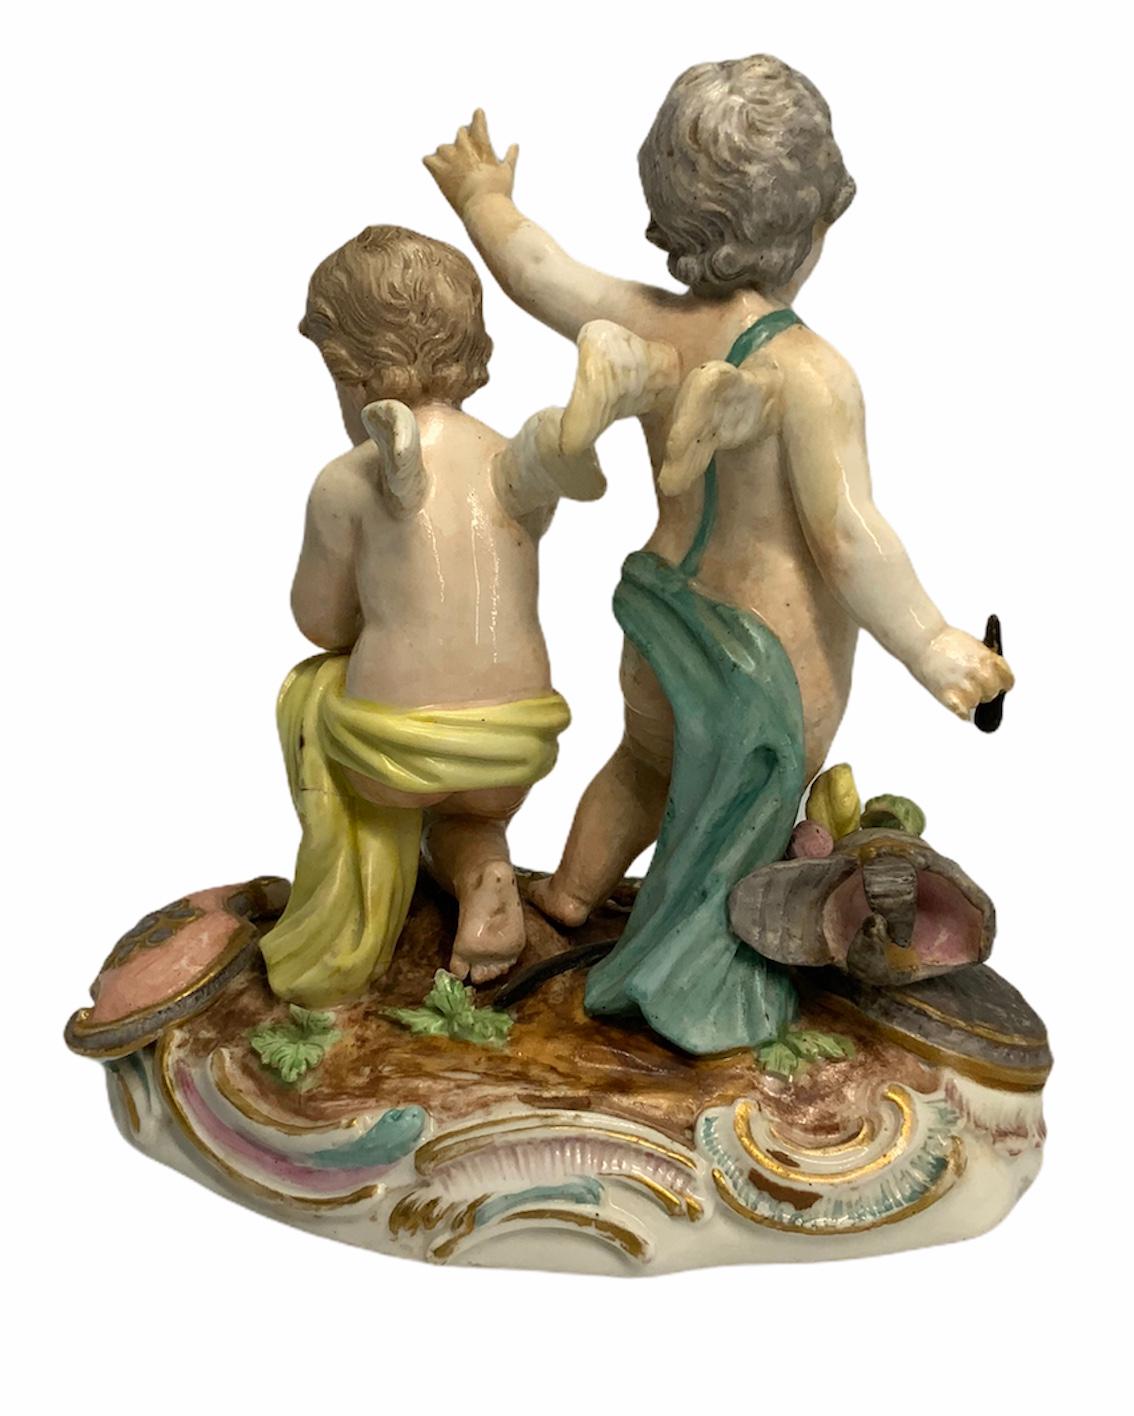 This rare porcelain group sculpture depicts a pair of winged warriors cherub figurines. They are without their helmet, armor, and swords. One is in a victorious posture and the other one is thoughtful and down in one knee holding his helmet. The